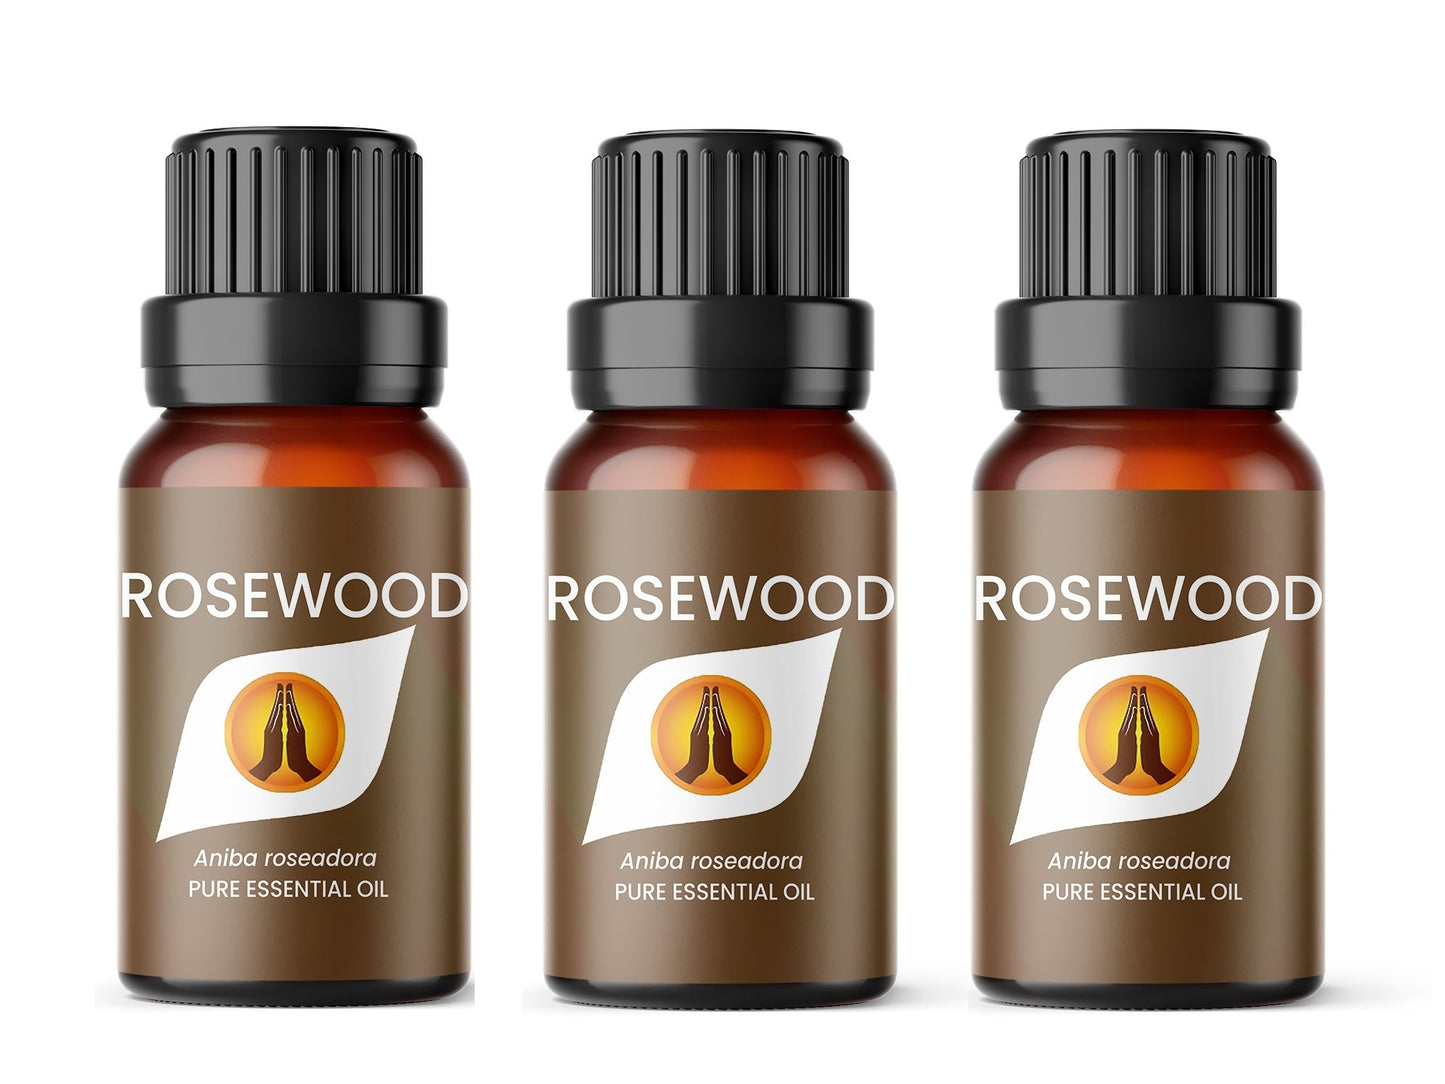 Rosewood Pure Essential Oil - Aroma Energy